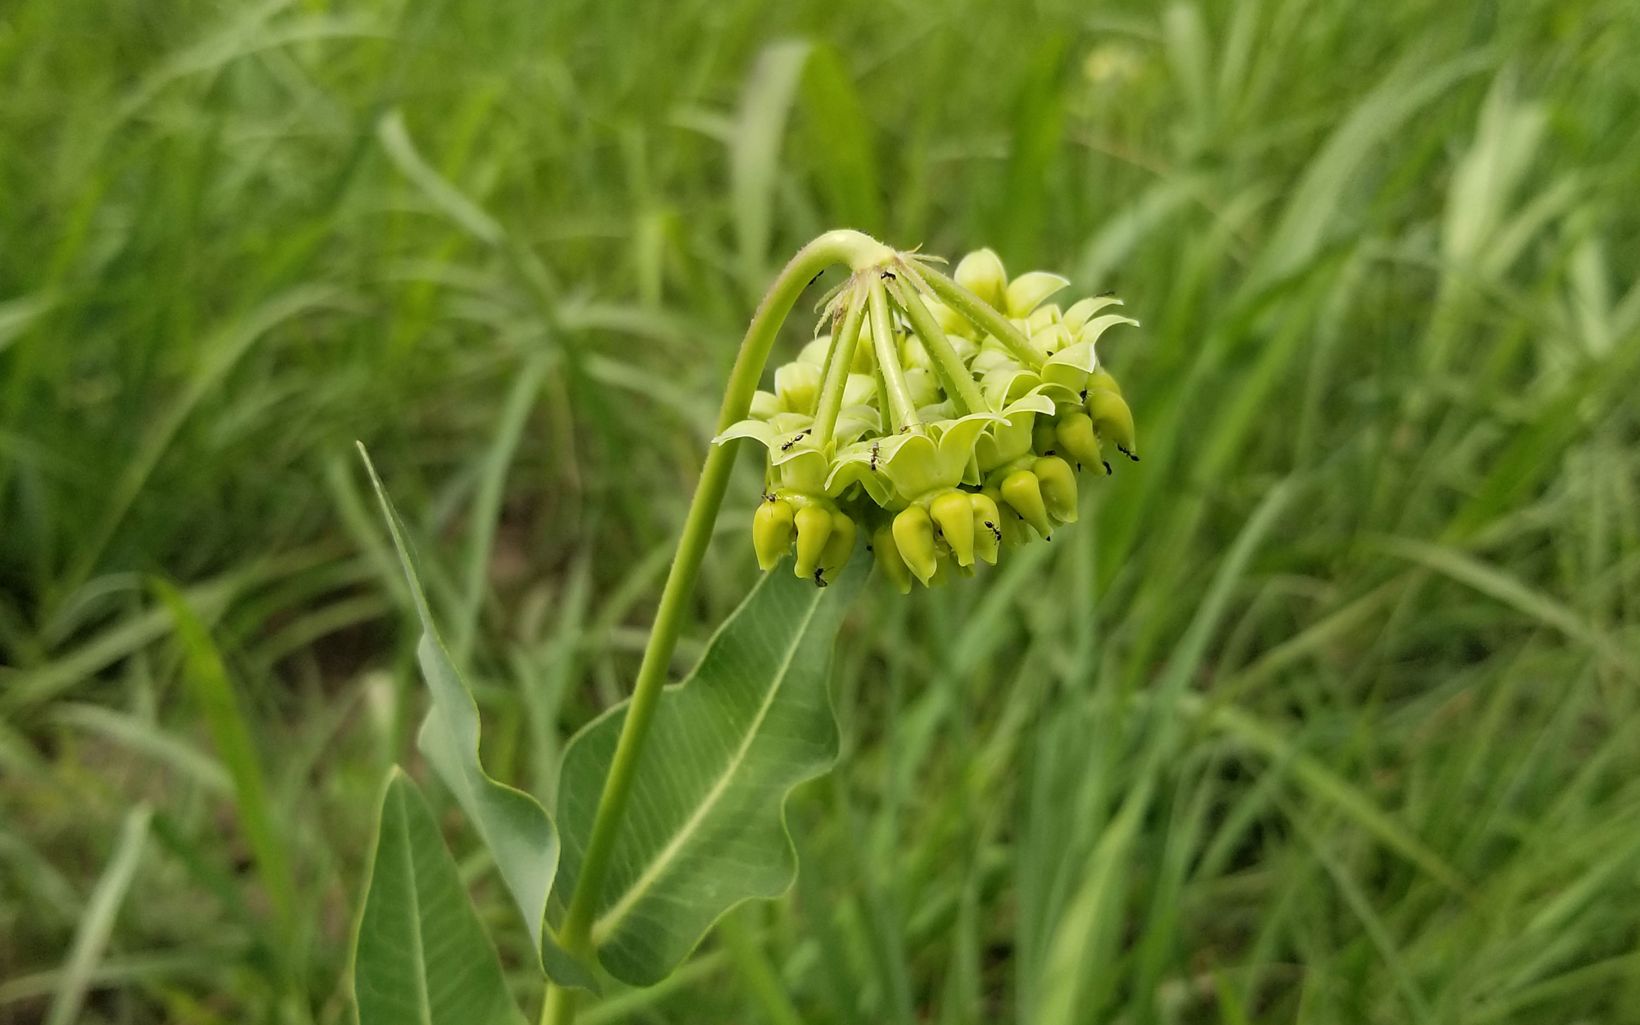 
                
                  Mead's Milkweed An endangered tallgrass prairie plant. The largest know reproducing popultation of Mead's milkweed is in Anderson County, Kansas where TNC owns 1,450 acres.
                  © Laura Rose Clawson/TNC
                
              